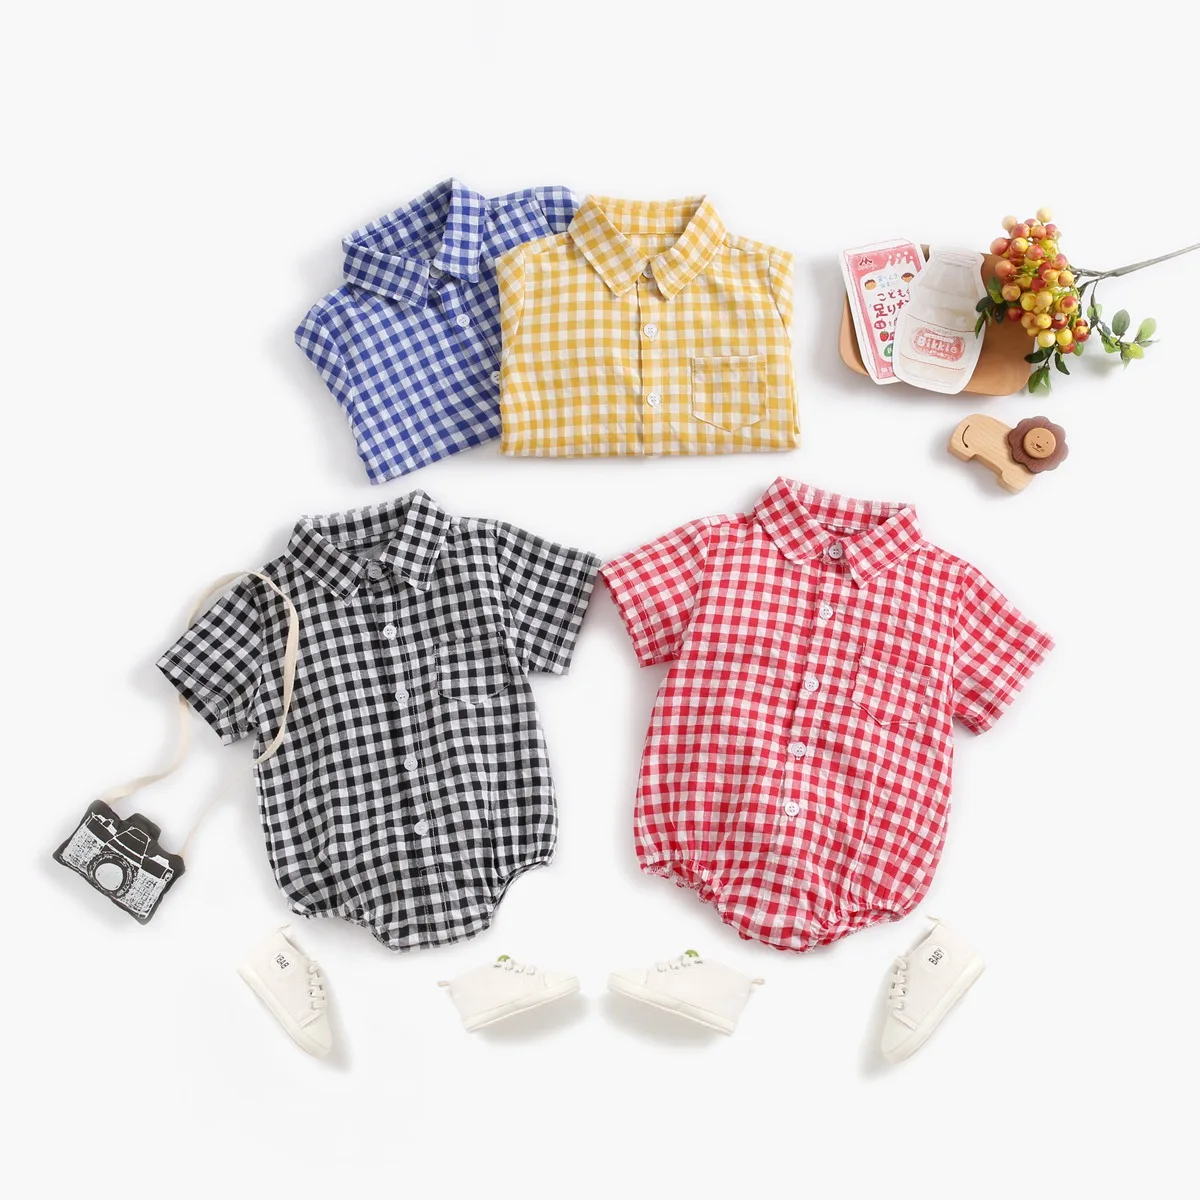 

2020 plaid jumpsuit crawl turn down collar summer pocket cotton short sleeved shirt kids baby romper for hot style, As pic shows, we can according to your request also